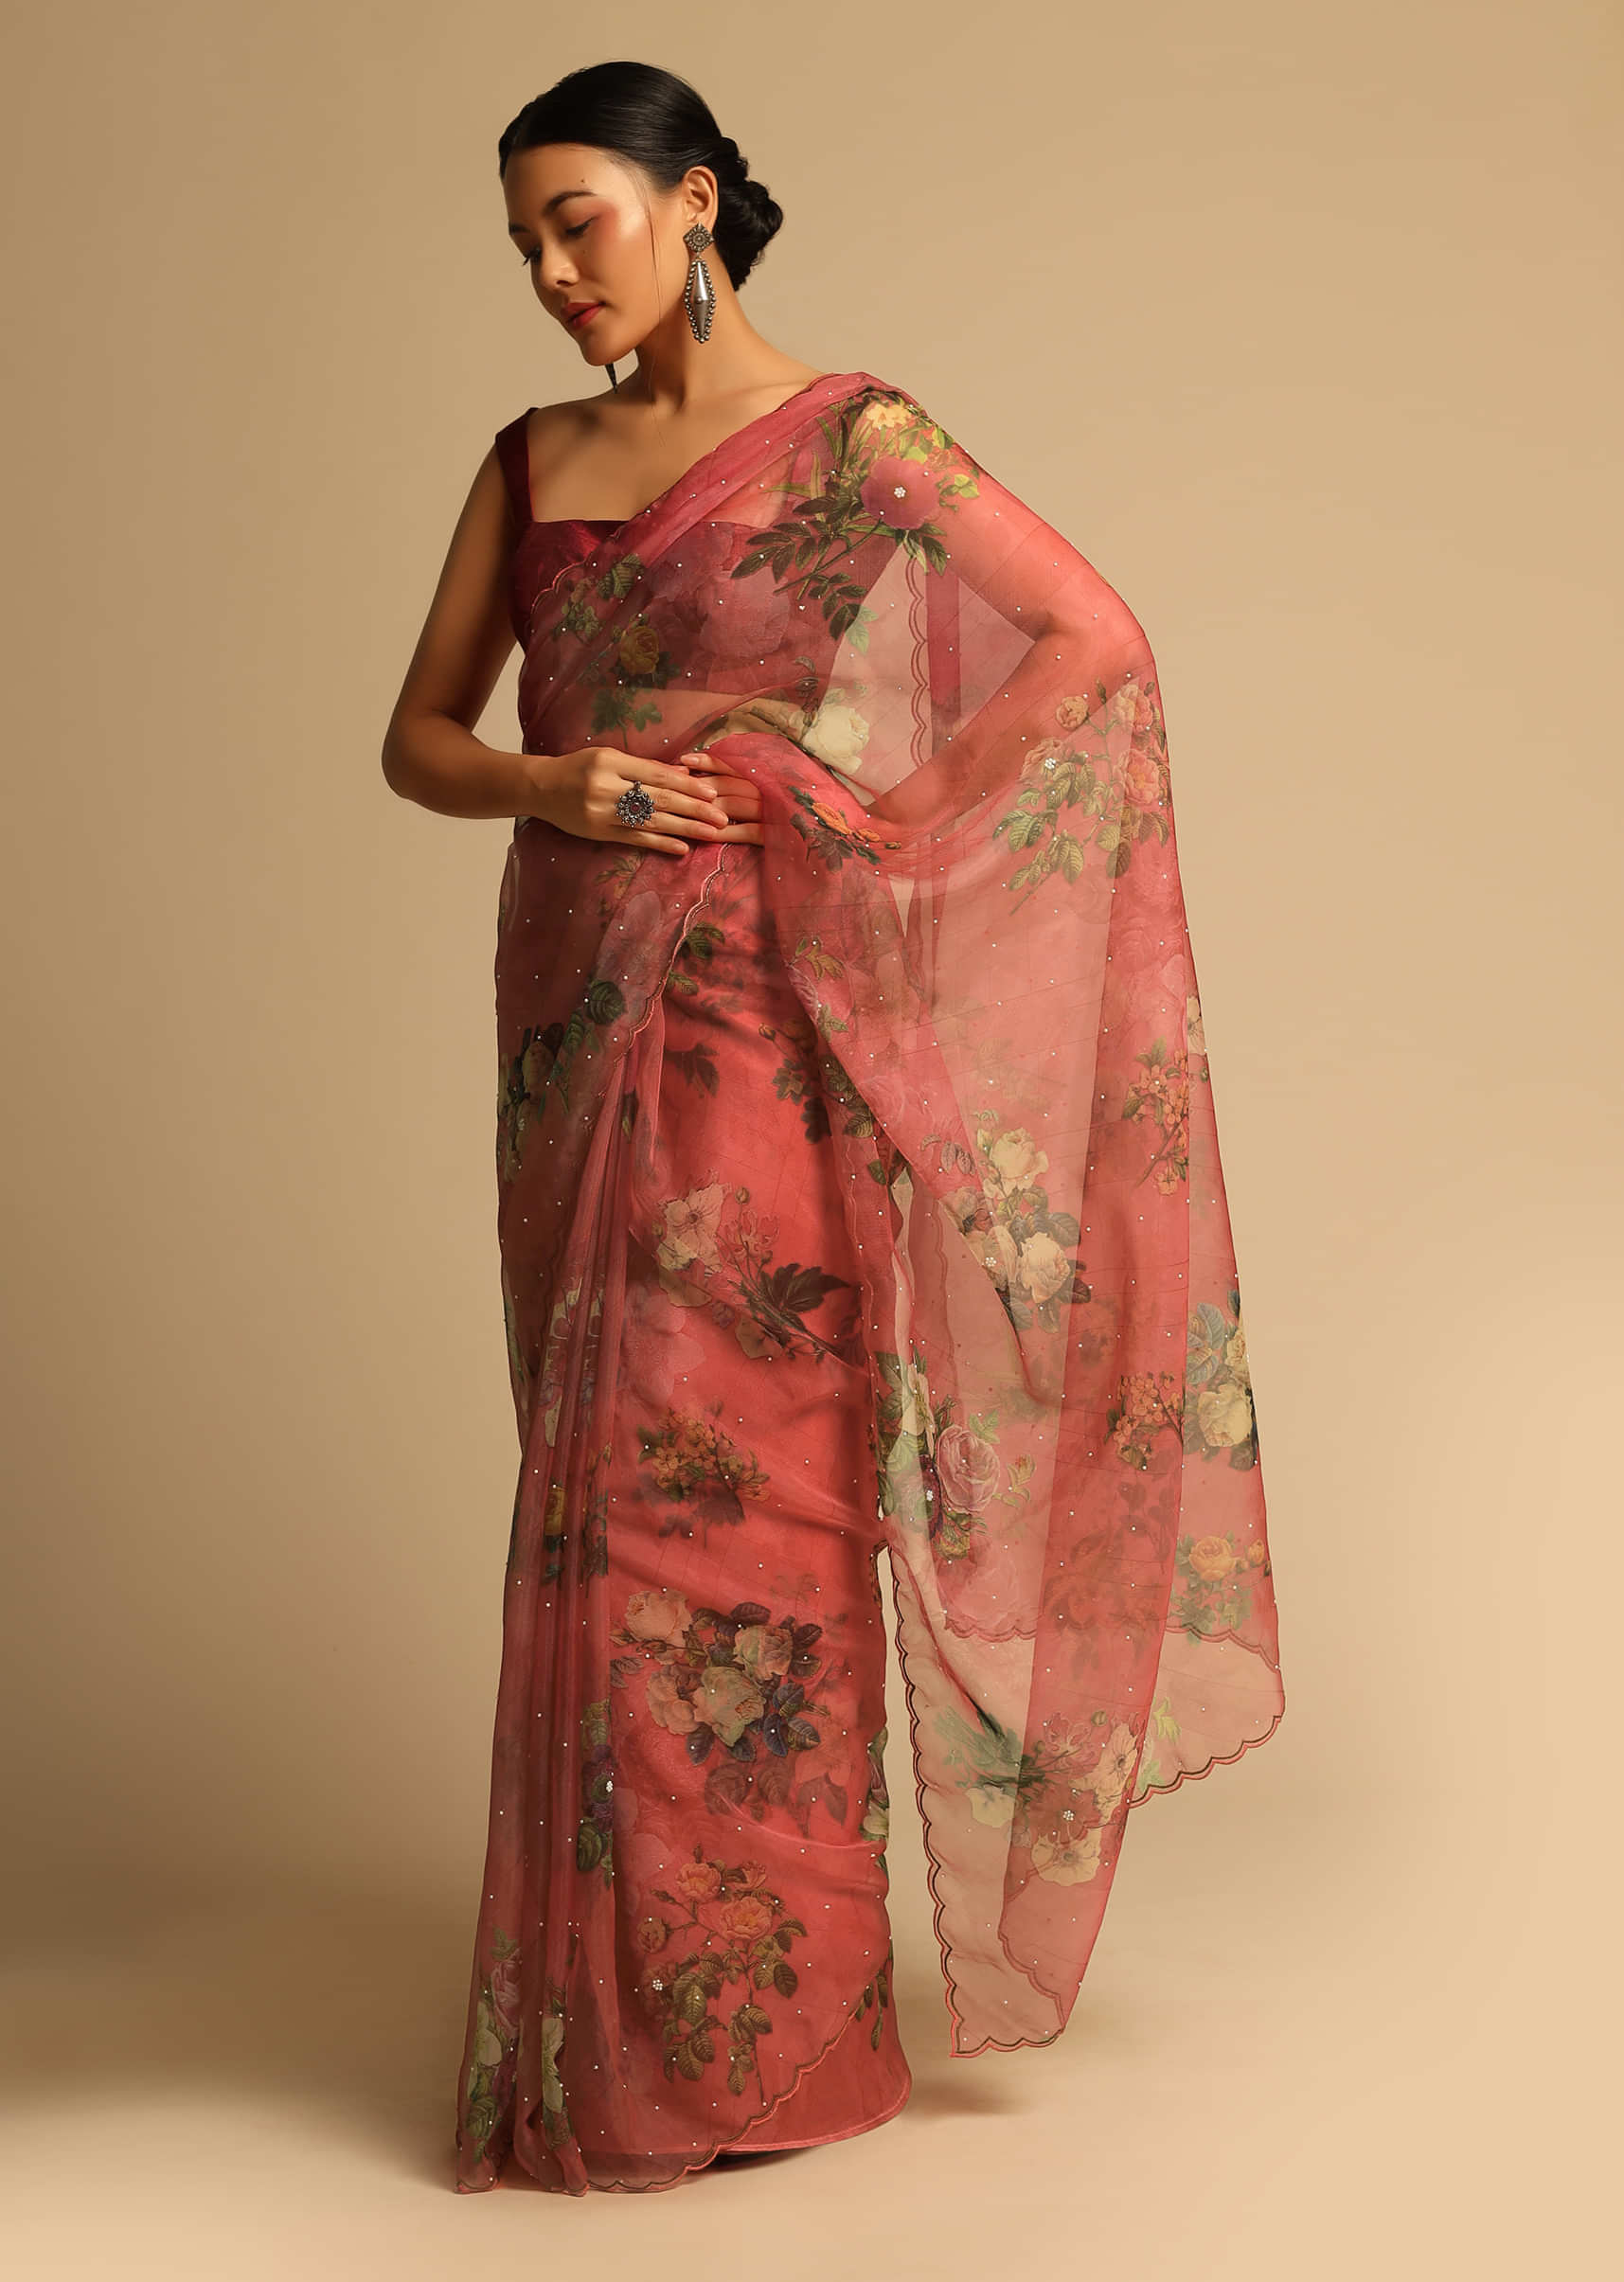 Mineral Red Saree In Organza With Floral Print All Over And Scalloped Resham Border Along With Unstitched Blouse